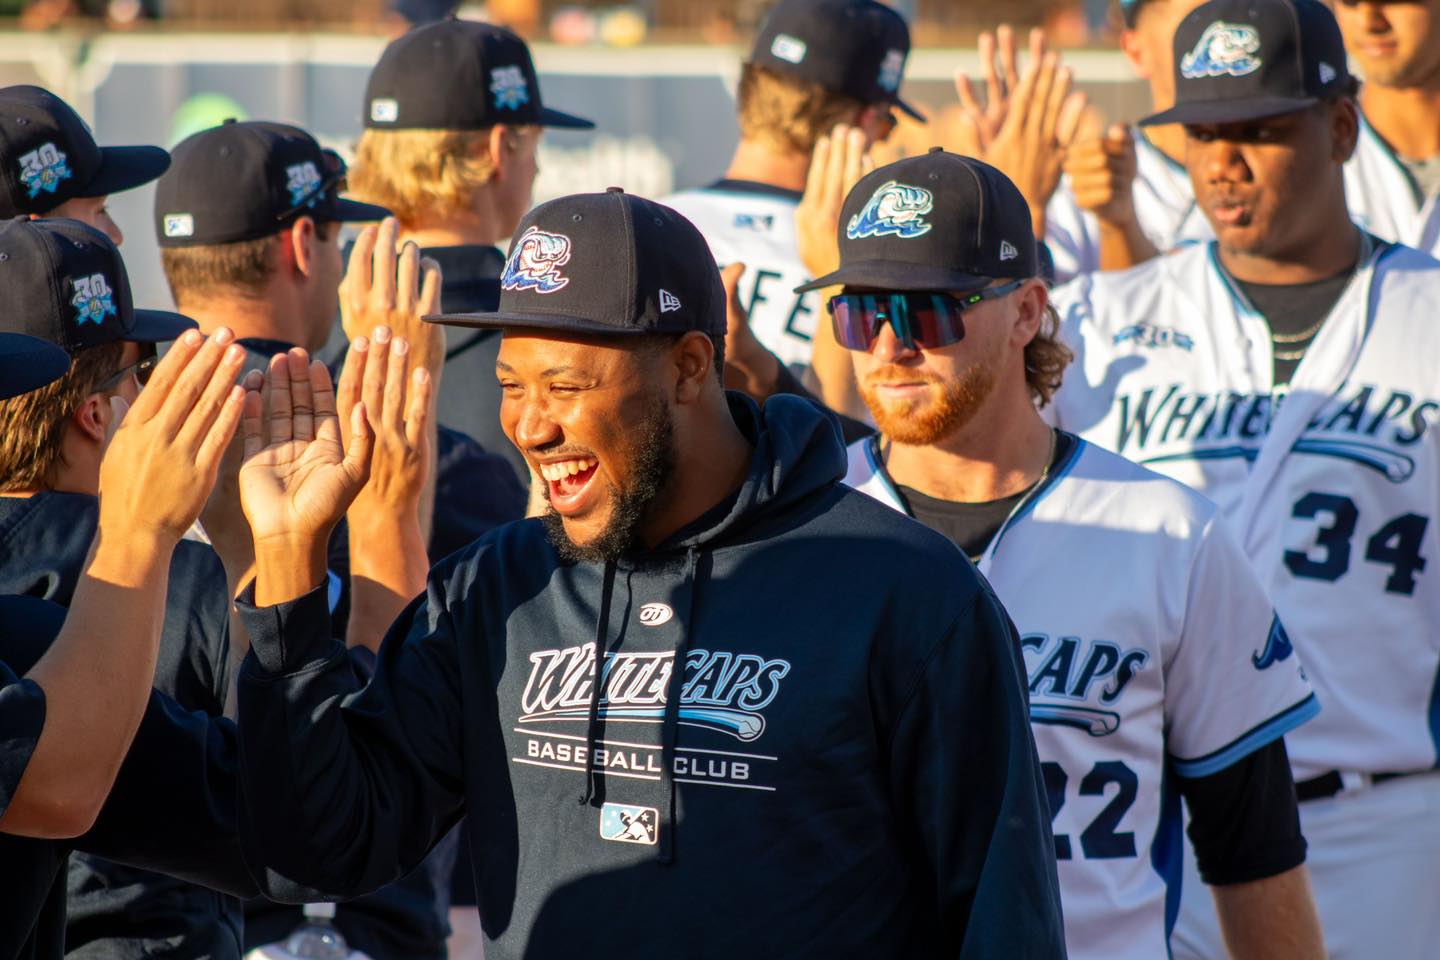 Whitecaps game cancelled today, but here's a VIDEO and PHOTO gallery from  yesterday's home opener